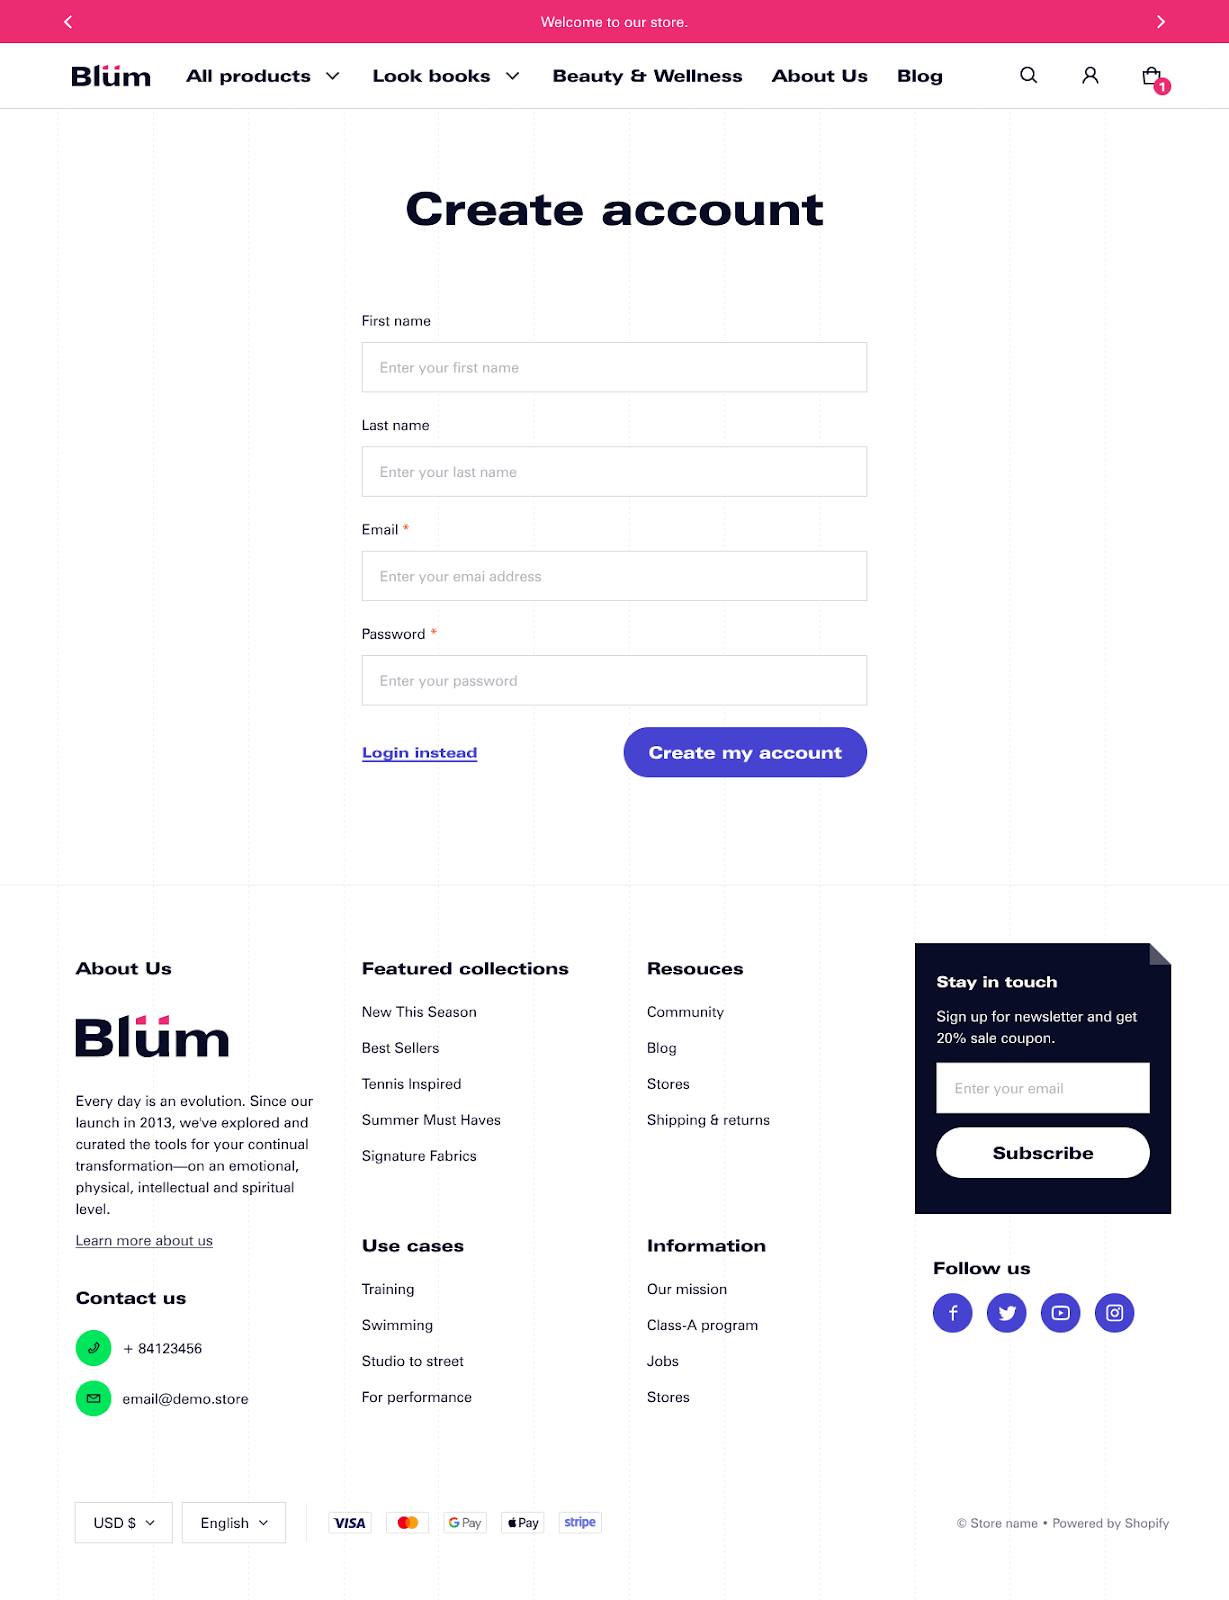  Blum signup page